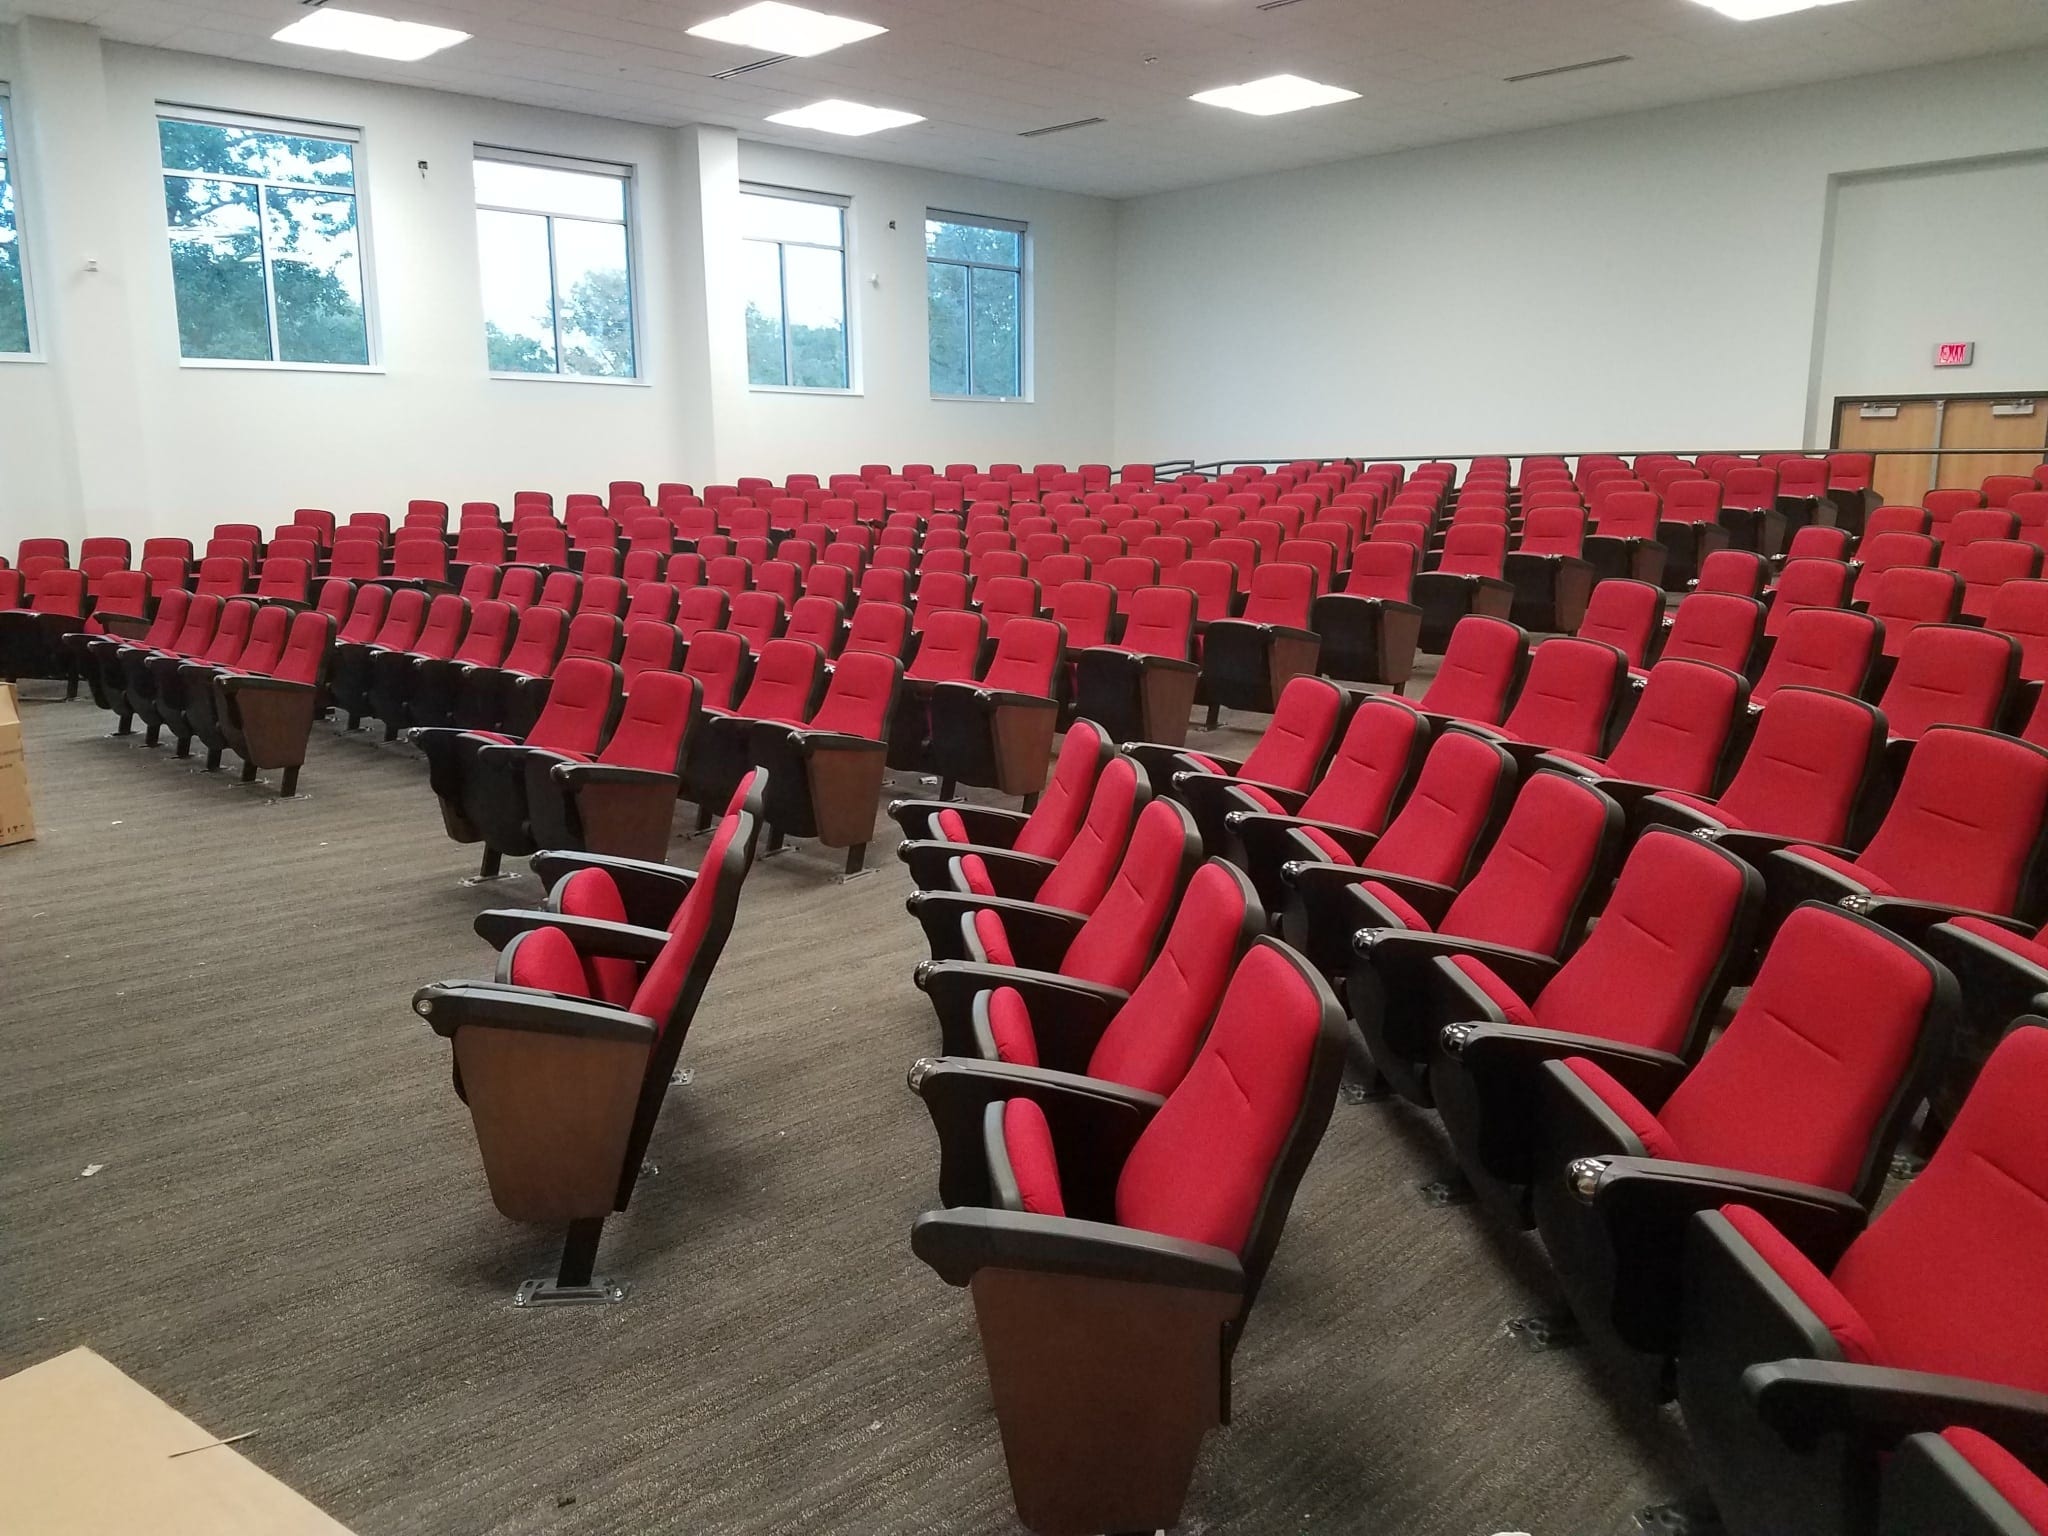 Fixed Seating Installation at Western Kentucky University-Bowling Green, KY